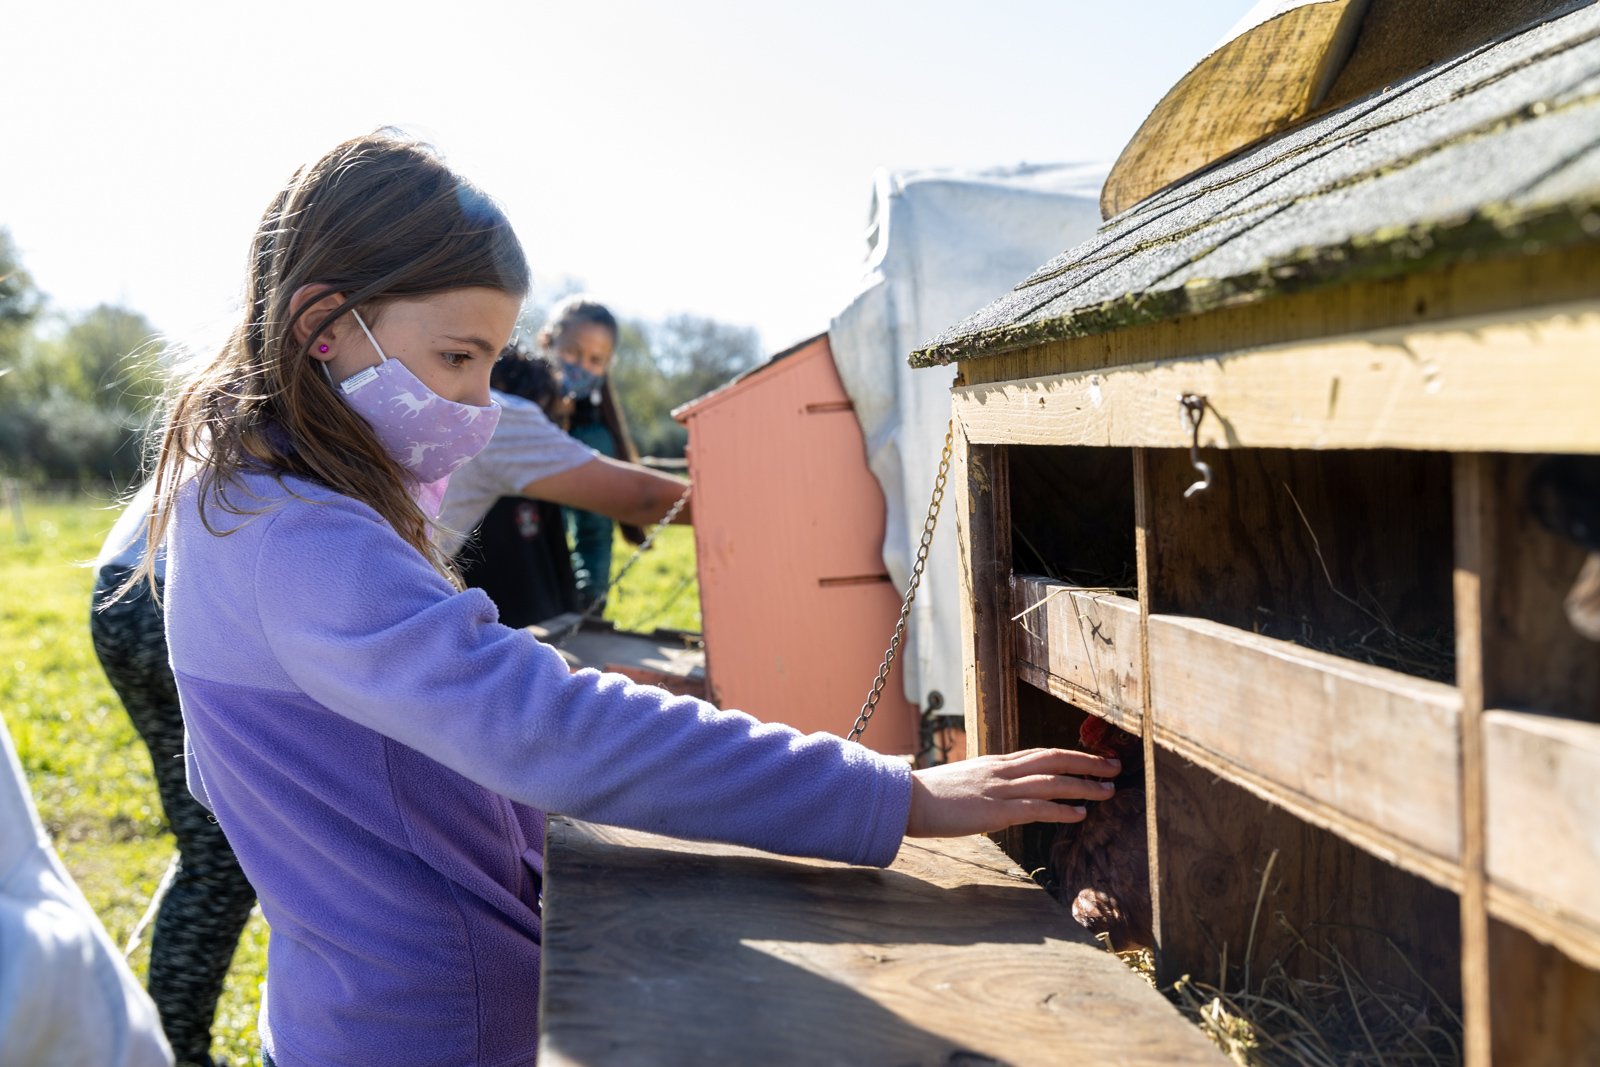 A young girl in a purple sweater reaching into a chicken coop to pet a chicken.